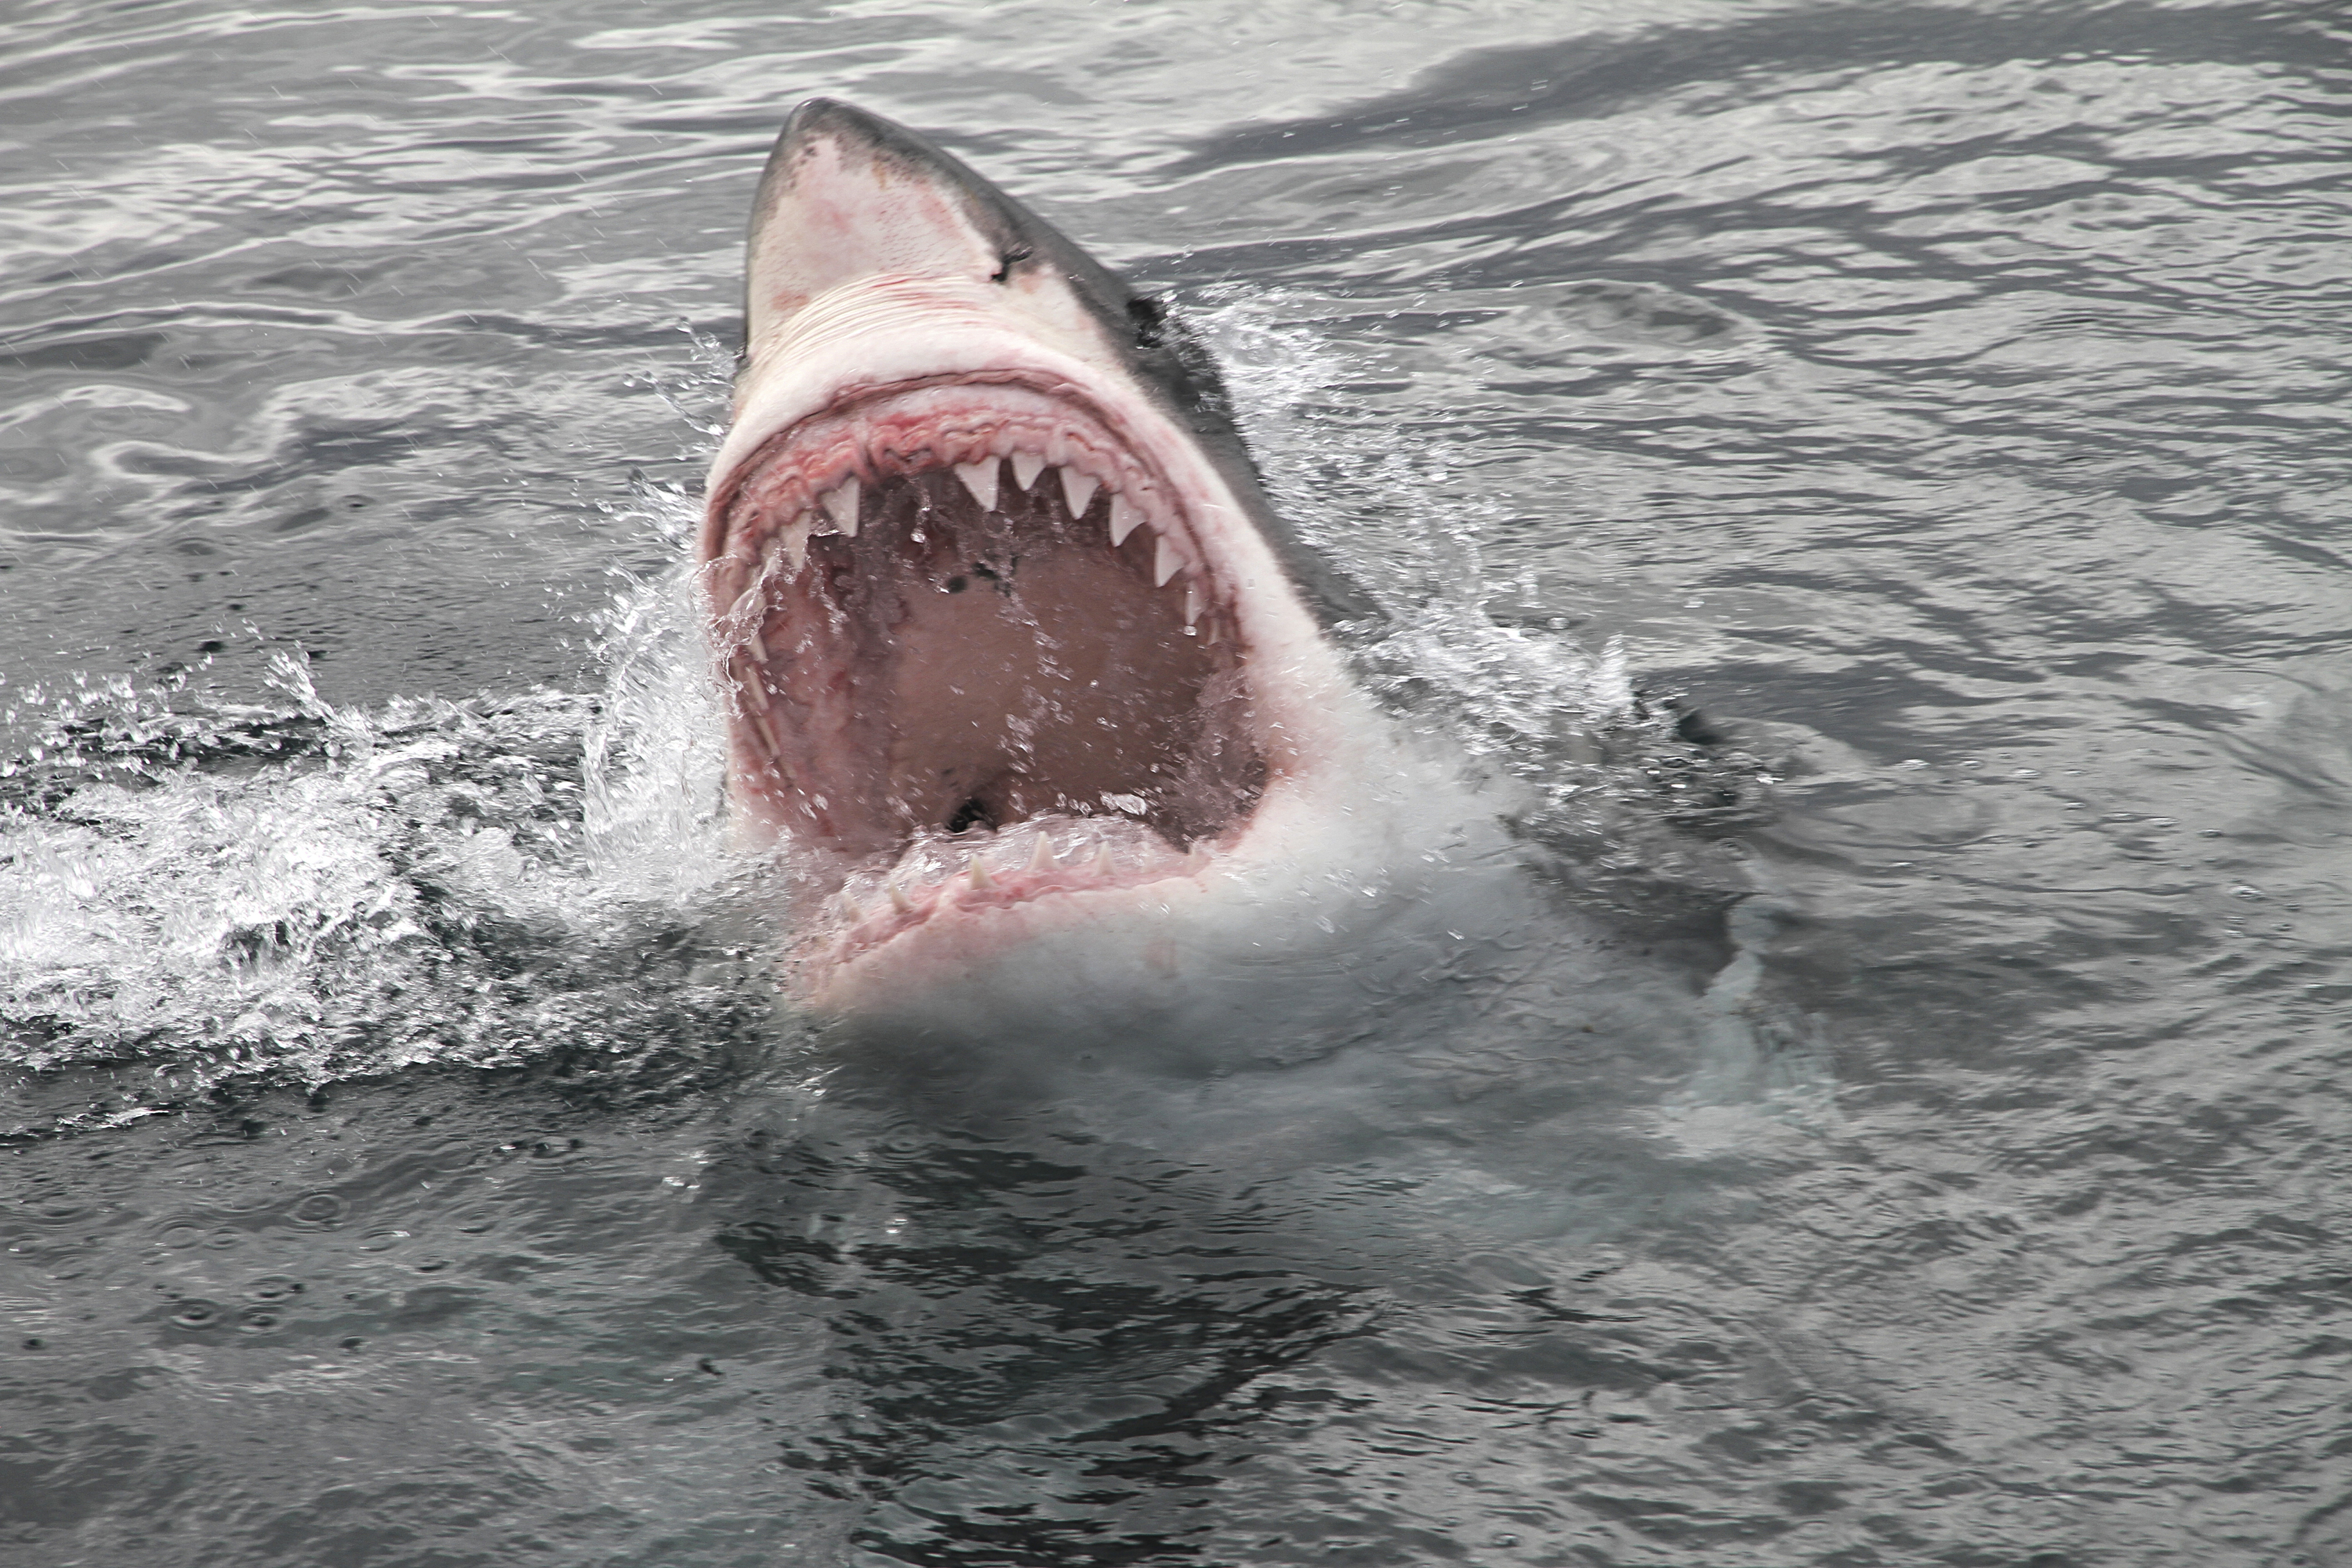 The Deadly Shark Attack That Rocked a Community: 'It Was Like Jaws